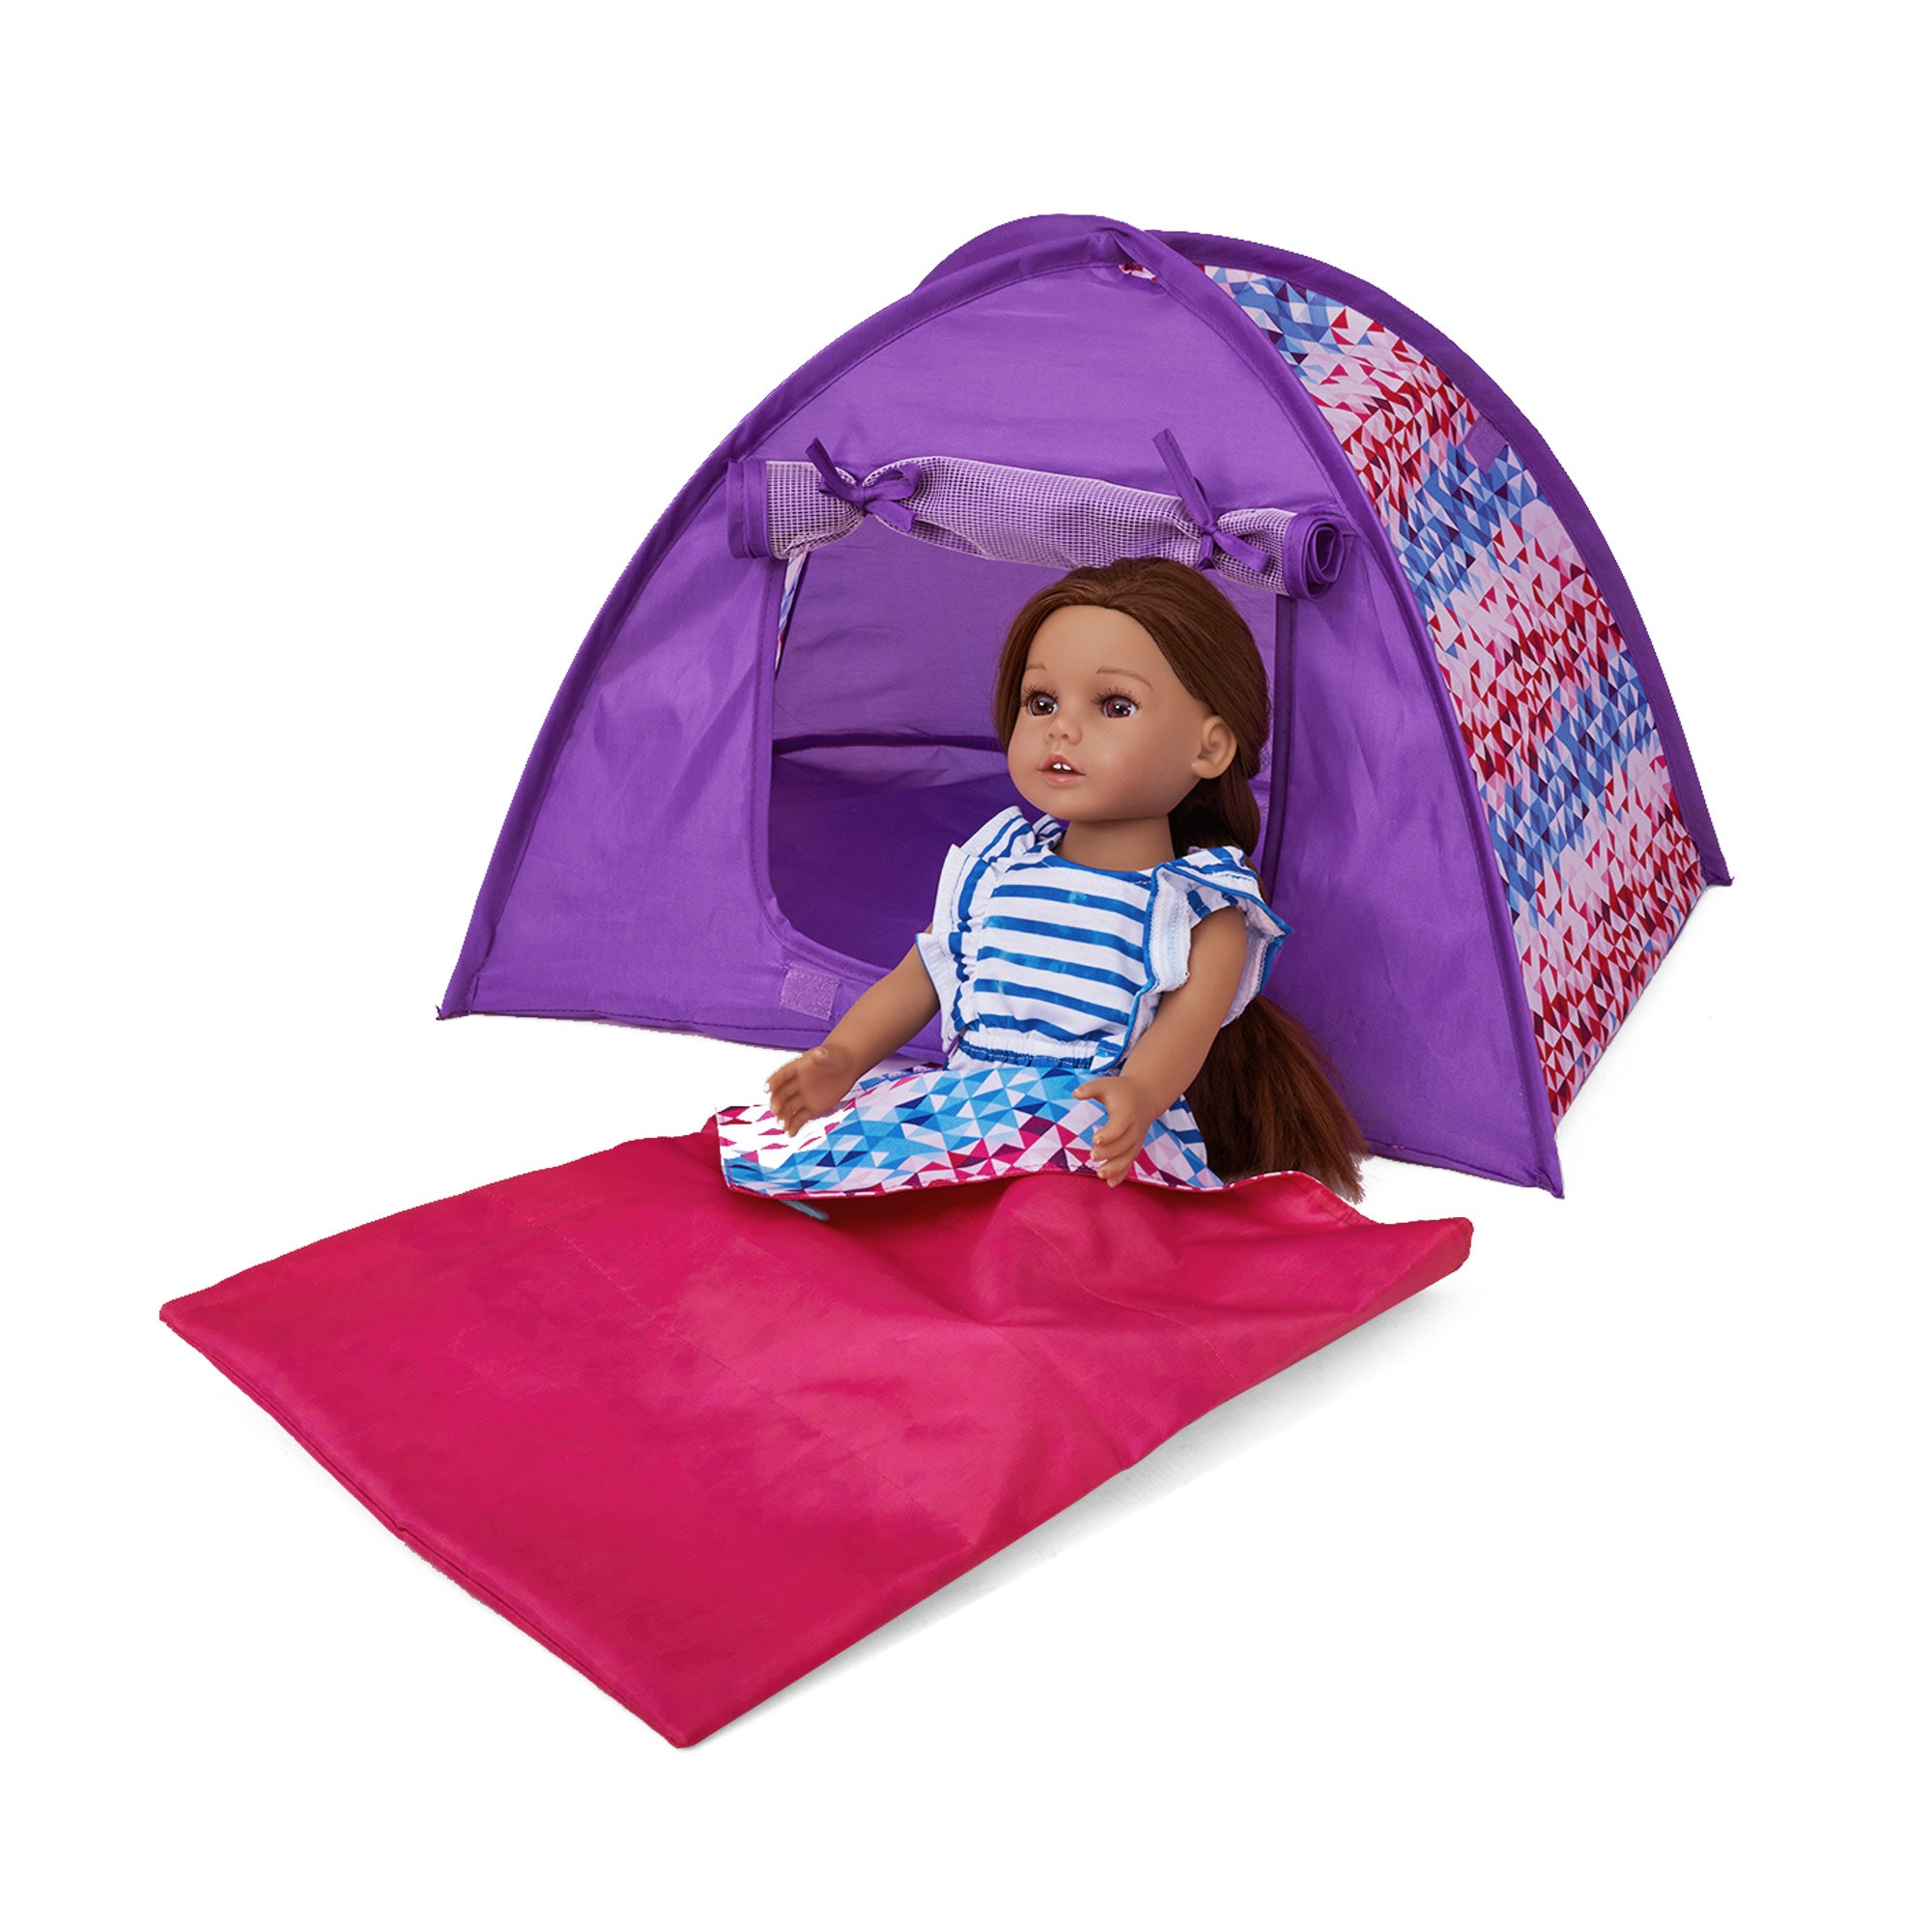 Sophia's Tent and Sleeping Bag Set for 18 Dolls, Purple/Pink